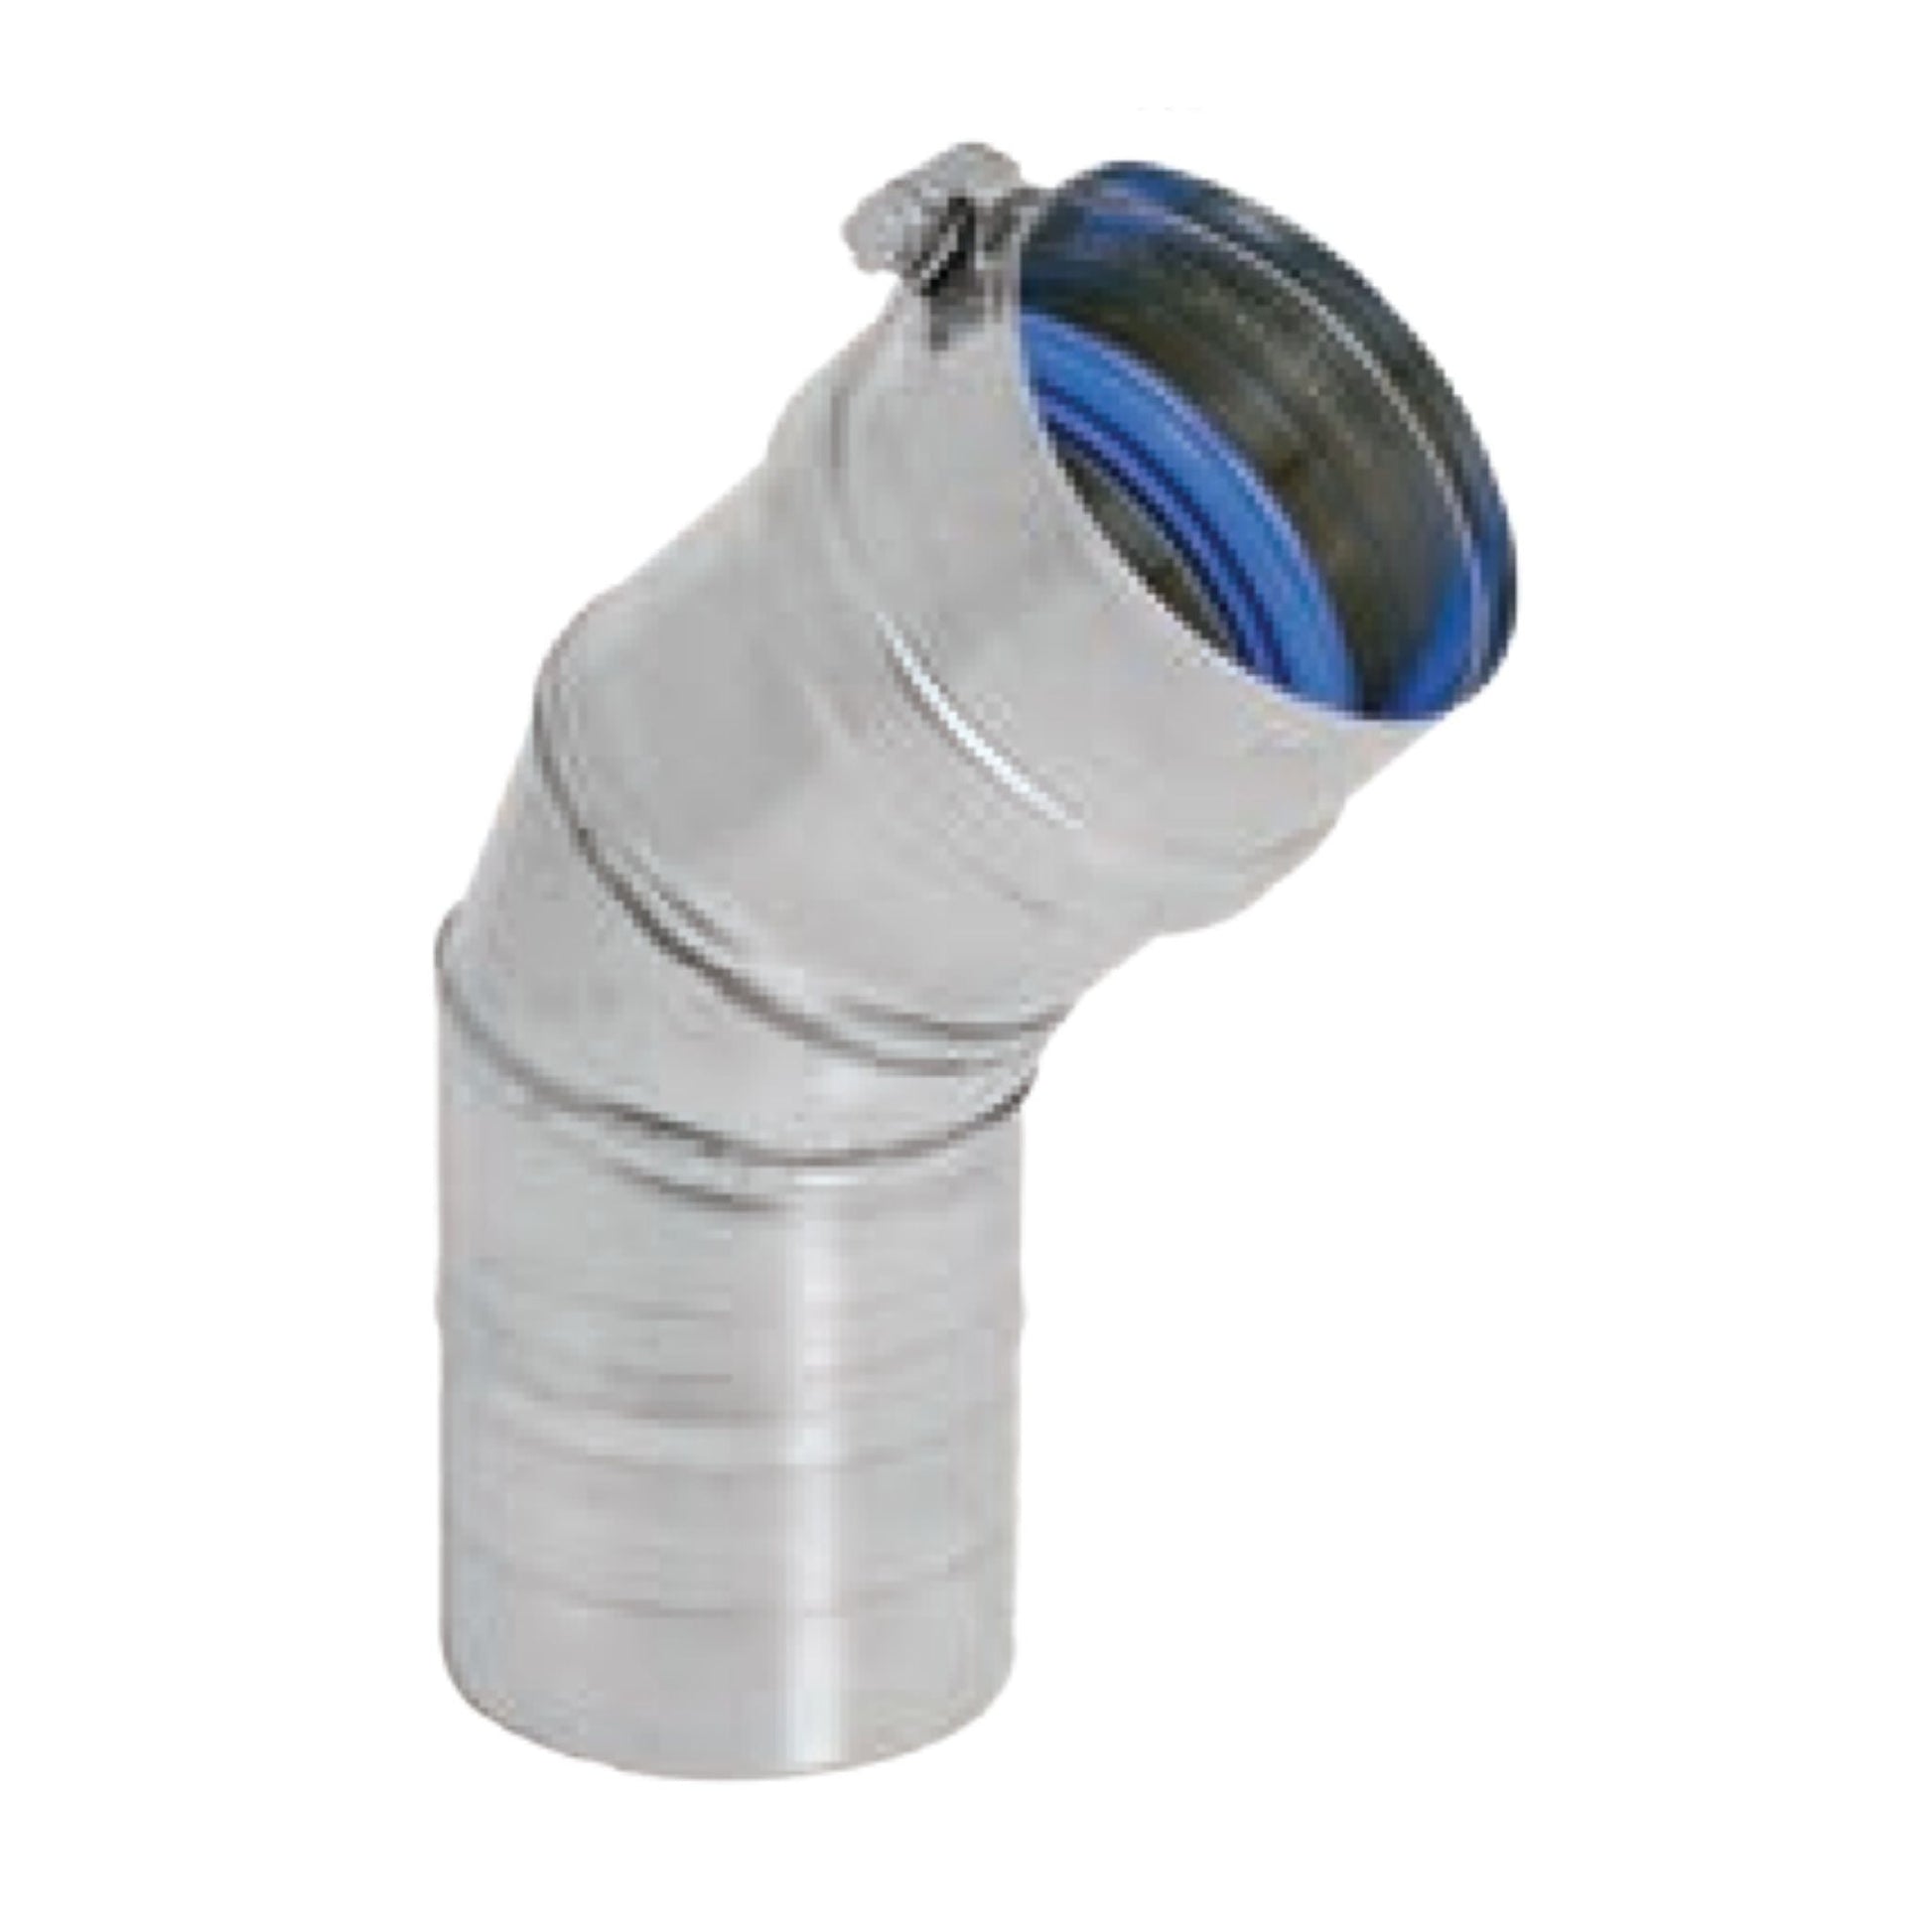 DuraVent FasNSeal 5" 45 Degree 316L Stainless Steel Elbow